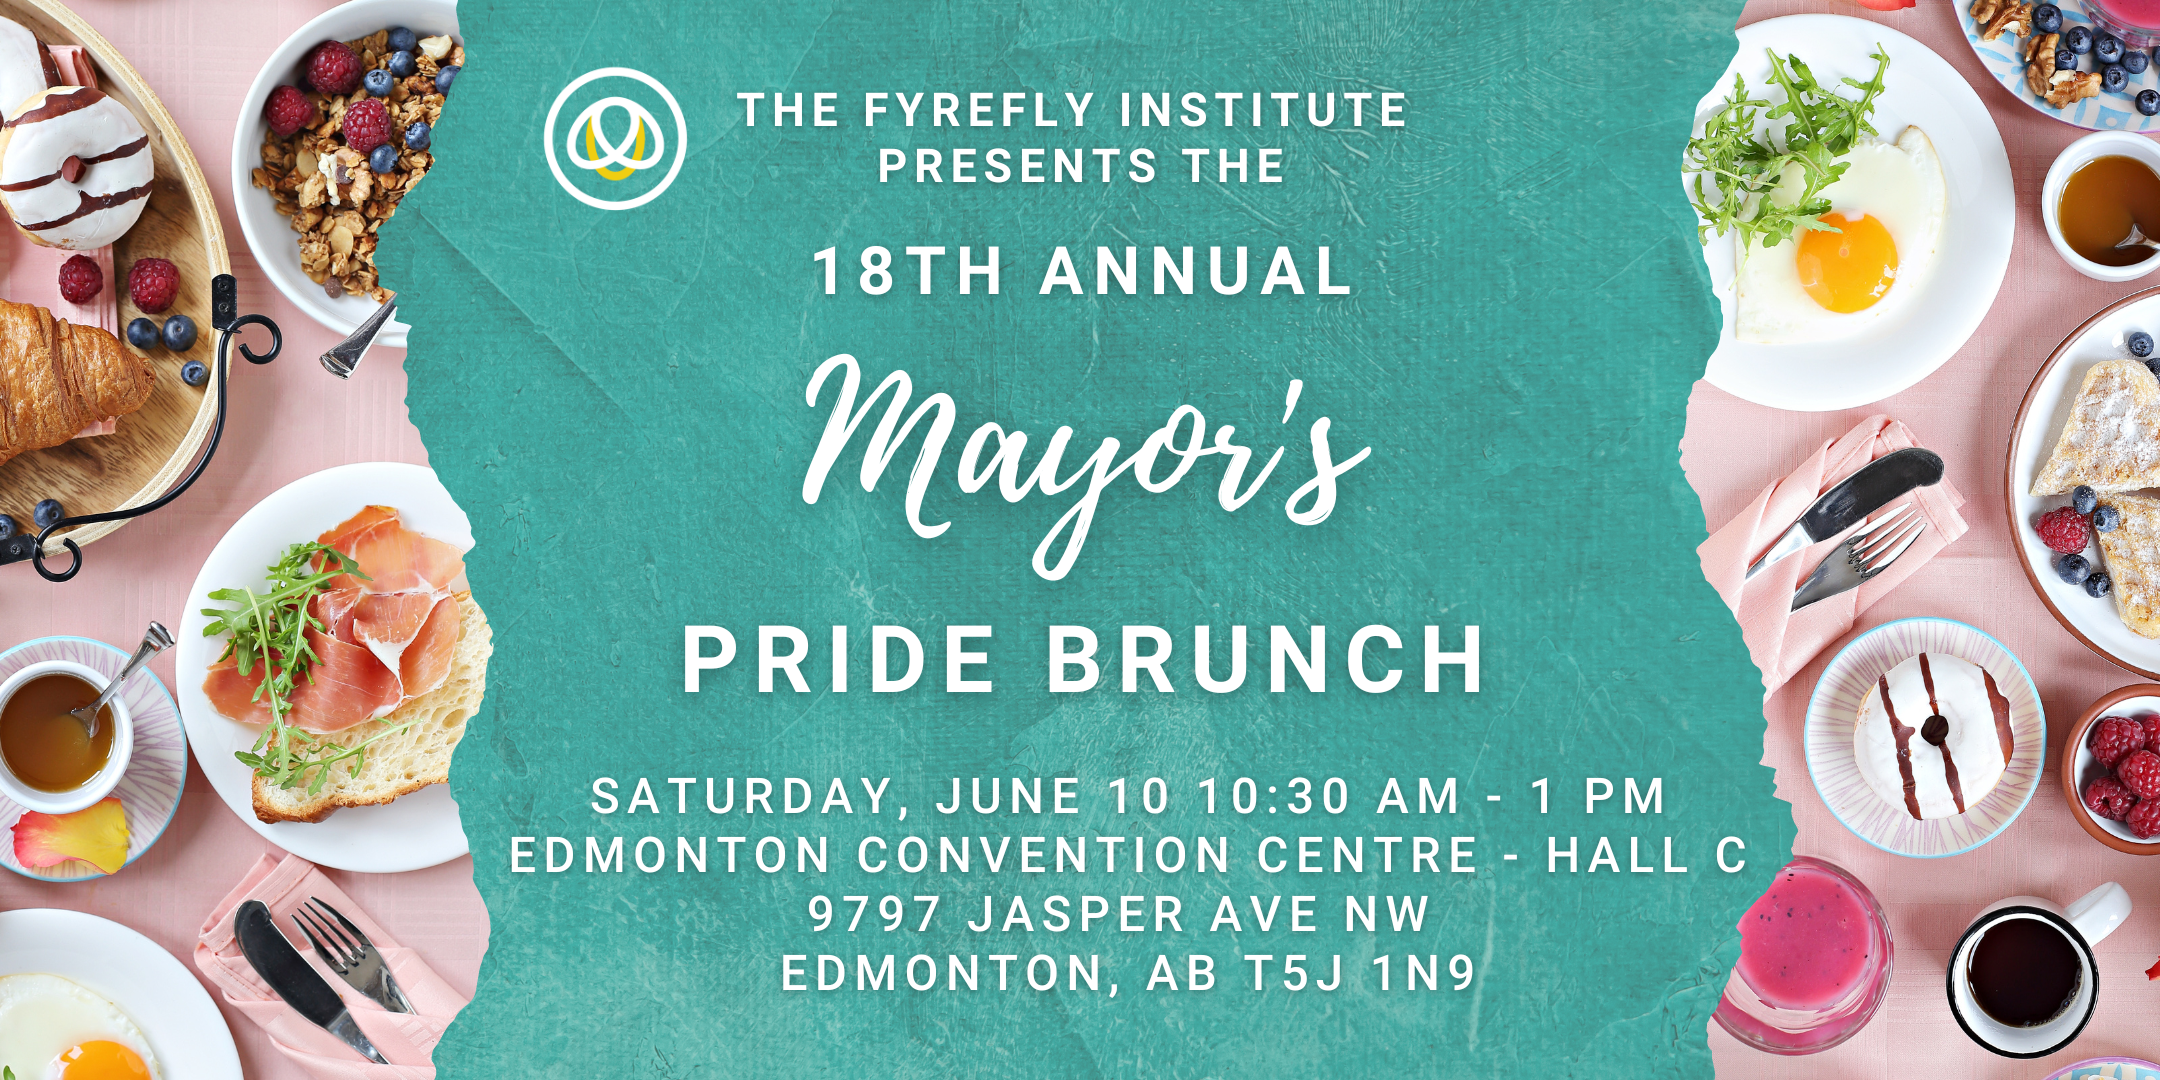 mayors-pride-brunch-announcement-2160-1080-px-3.png